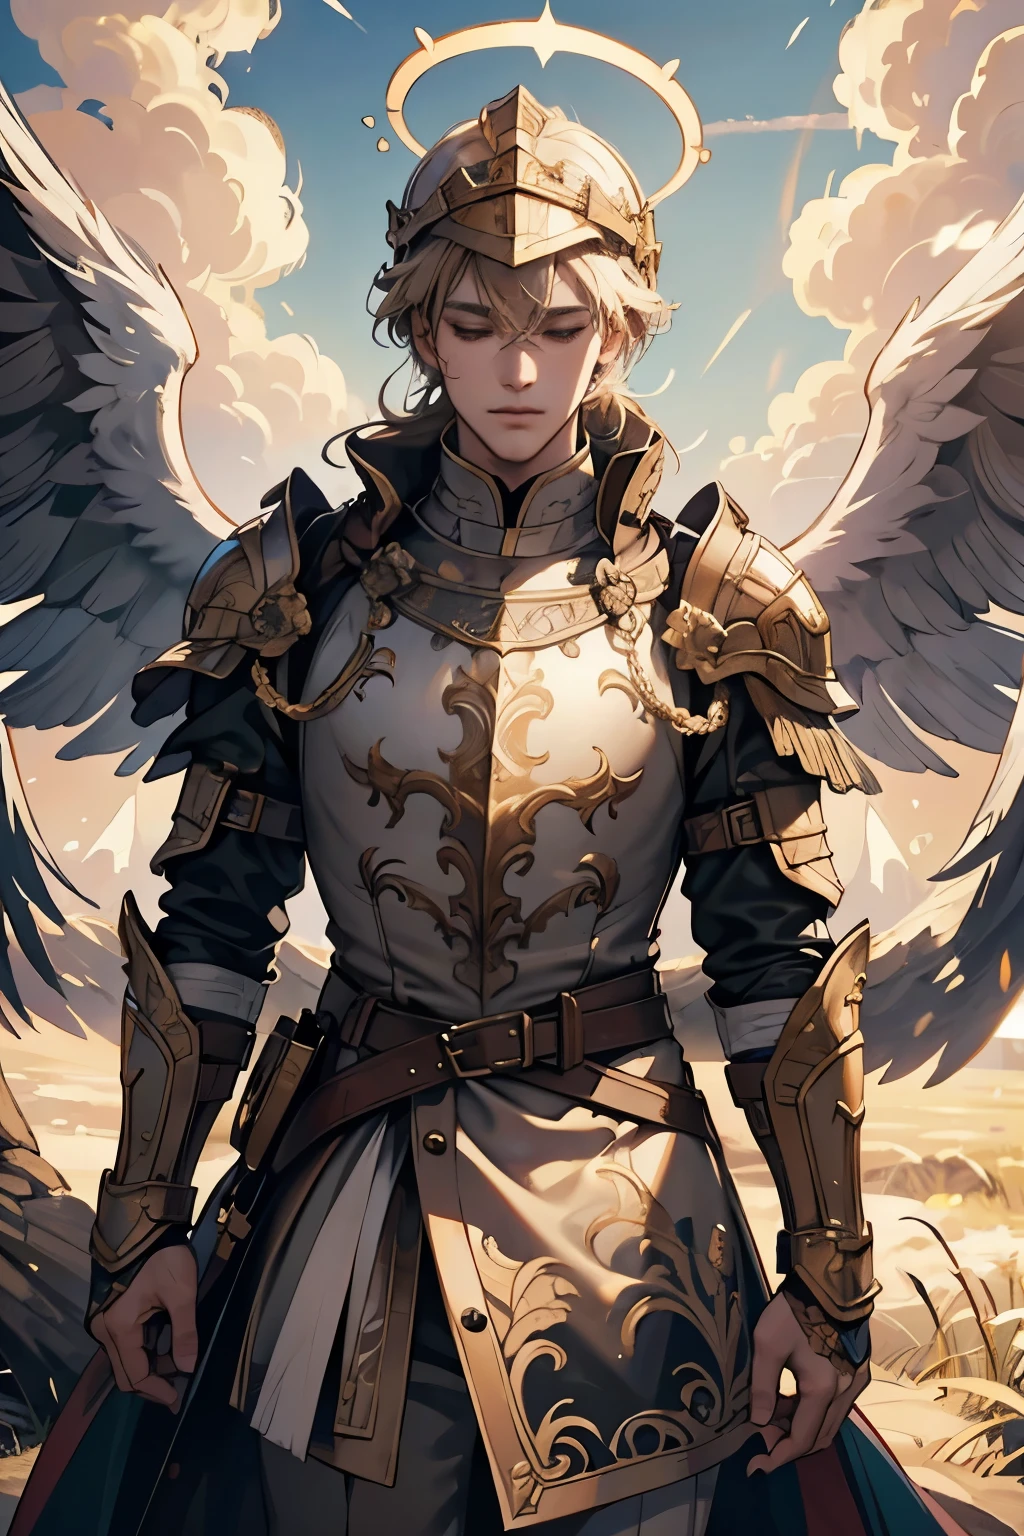 (ultra-detailed, faceless, helmetless portrait of an unknown male Renaissance soldier in heaven), intricately painted with divine radiance, heavenly aura surrounding, detailed muscle definition and armor textures, ethereal background of clouds and golden light, angels whispering in the background, delicate highlight on the soldier's chest plate, BREAK, masterpiece of divine artistry, 4k resolution, hyper-realistic, serene expression, halo adding to the heavenly theme, BREAK, shimmering armor and intricate patterns, wings slightly visible at the back, celestial colors enhancing the painting, BREAK, the soldier's eyes closed in peaceful rest